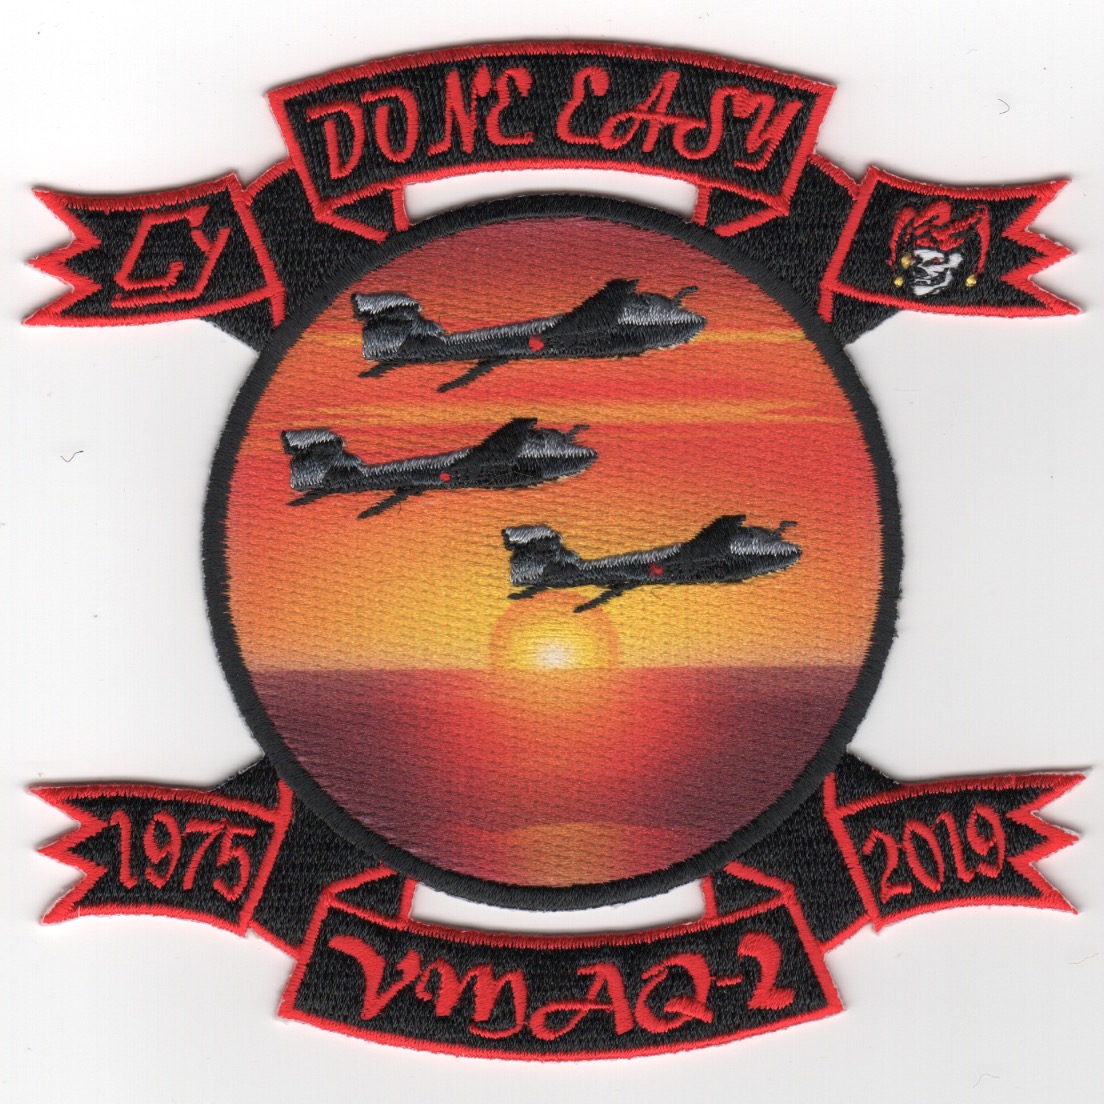 VMAQ-2 'DONE EASY' Decomm Patch